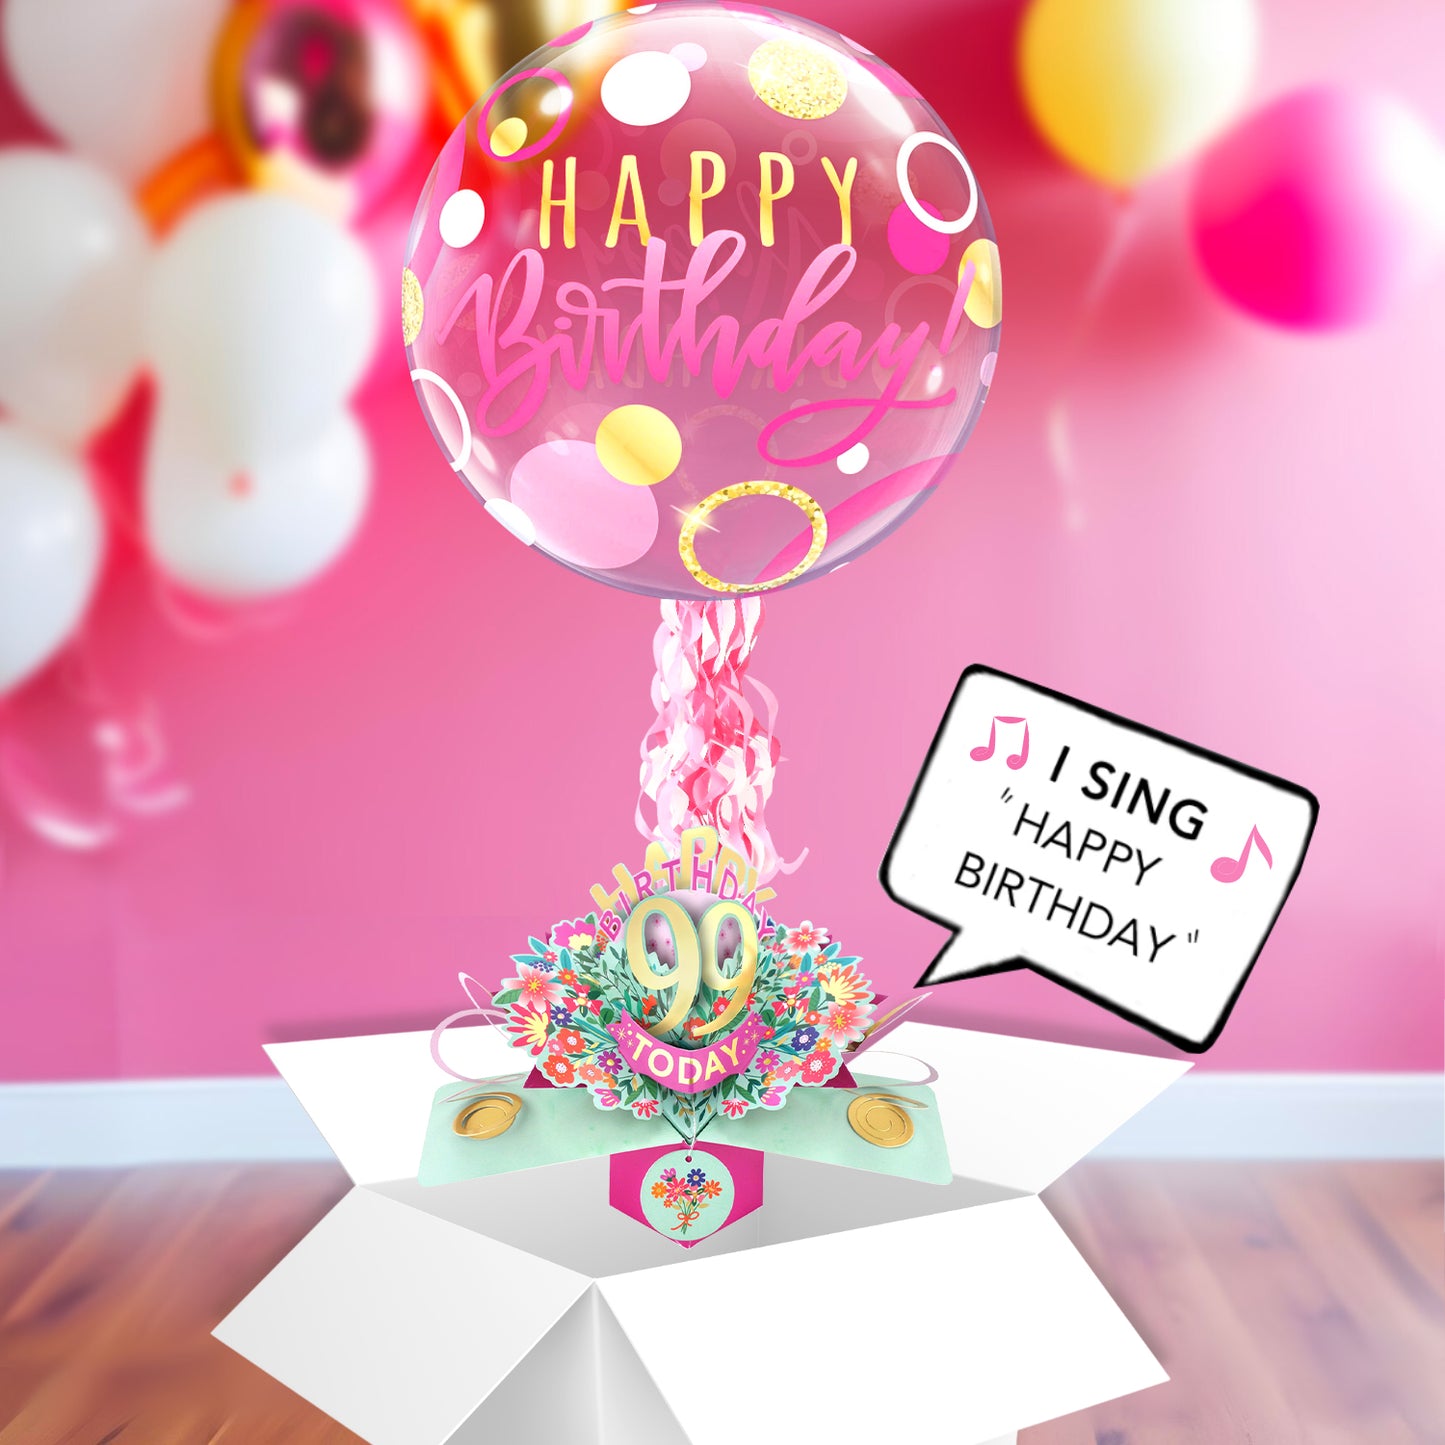 99th Birthday Pop Up Card & Musical Balloon Surprise Delivered In A Box For Her